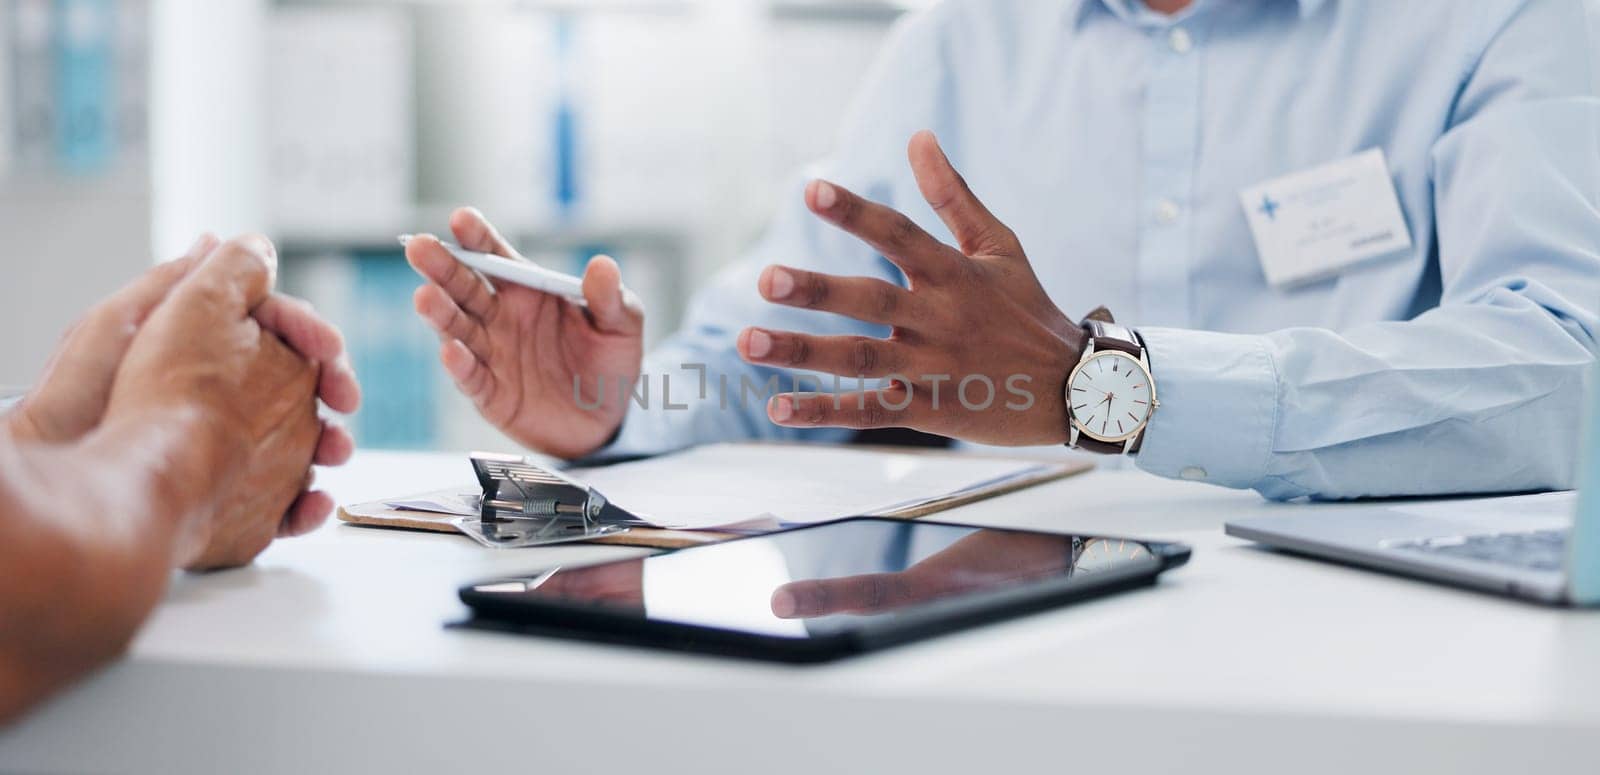 Hands, doctor and patient with clipboard for results, insurance paperwork and tablet for healthcare. People, medic and checklist with pen in consultation, counselling or discussion in hospital office.